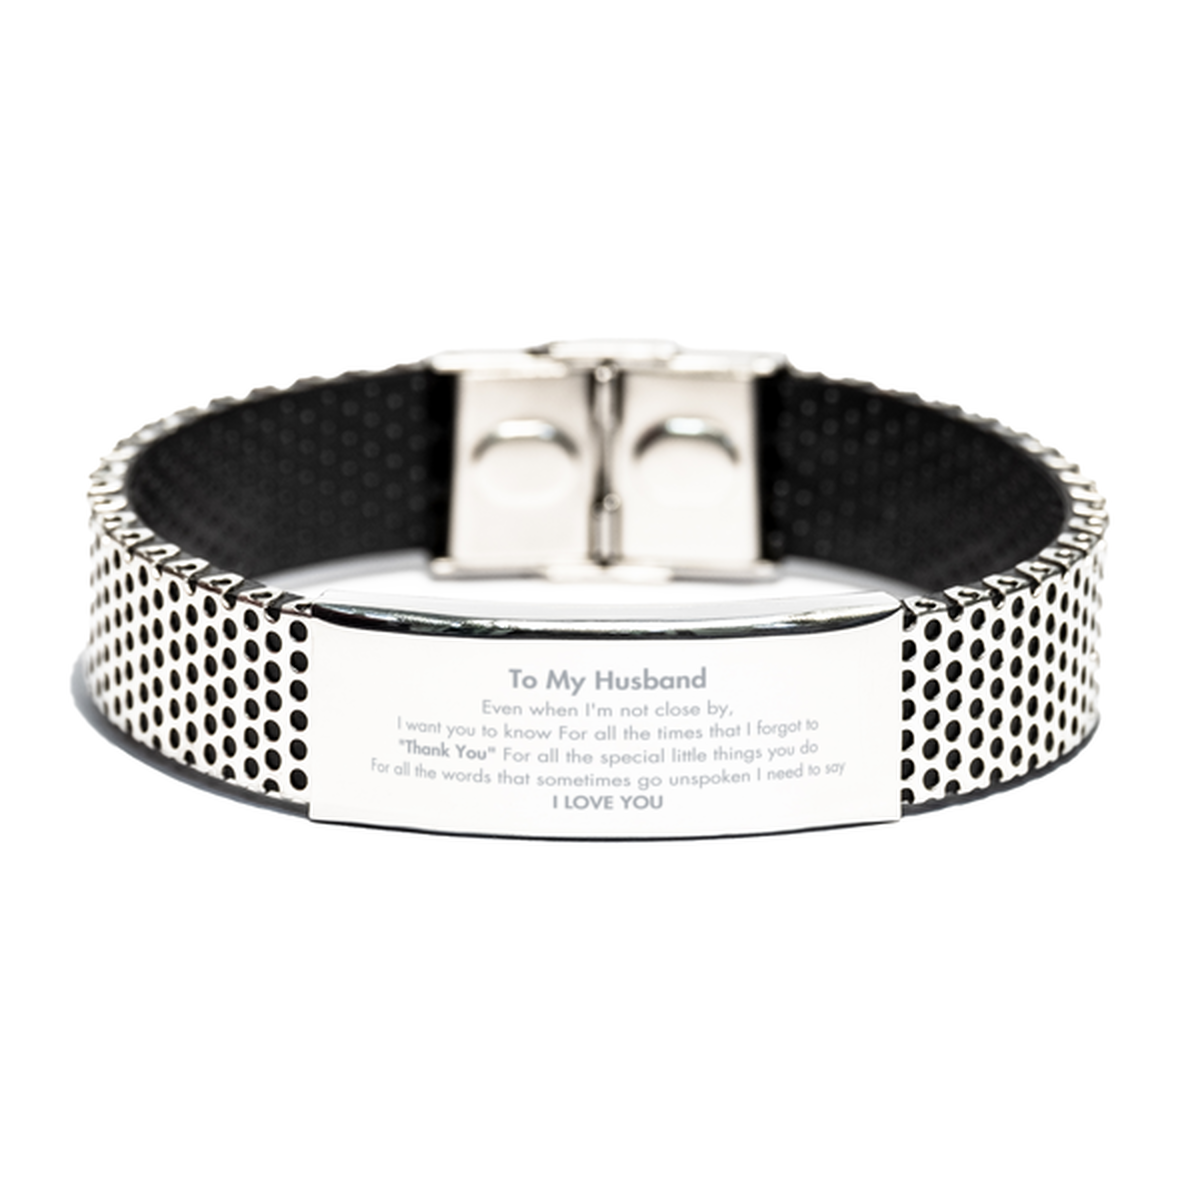 Thank You Gifts for Husband, Keepsake Stainless Steel Bracelet Gifts for Husband Birthday Mother's day Father's Day Husband For all the words That sometimes go unspoken I need to say I LOVE YOU